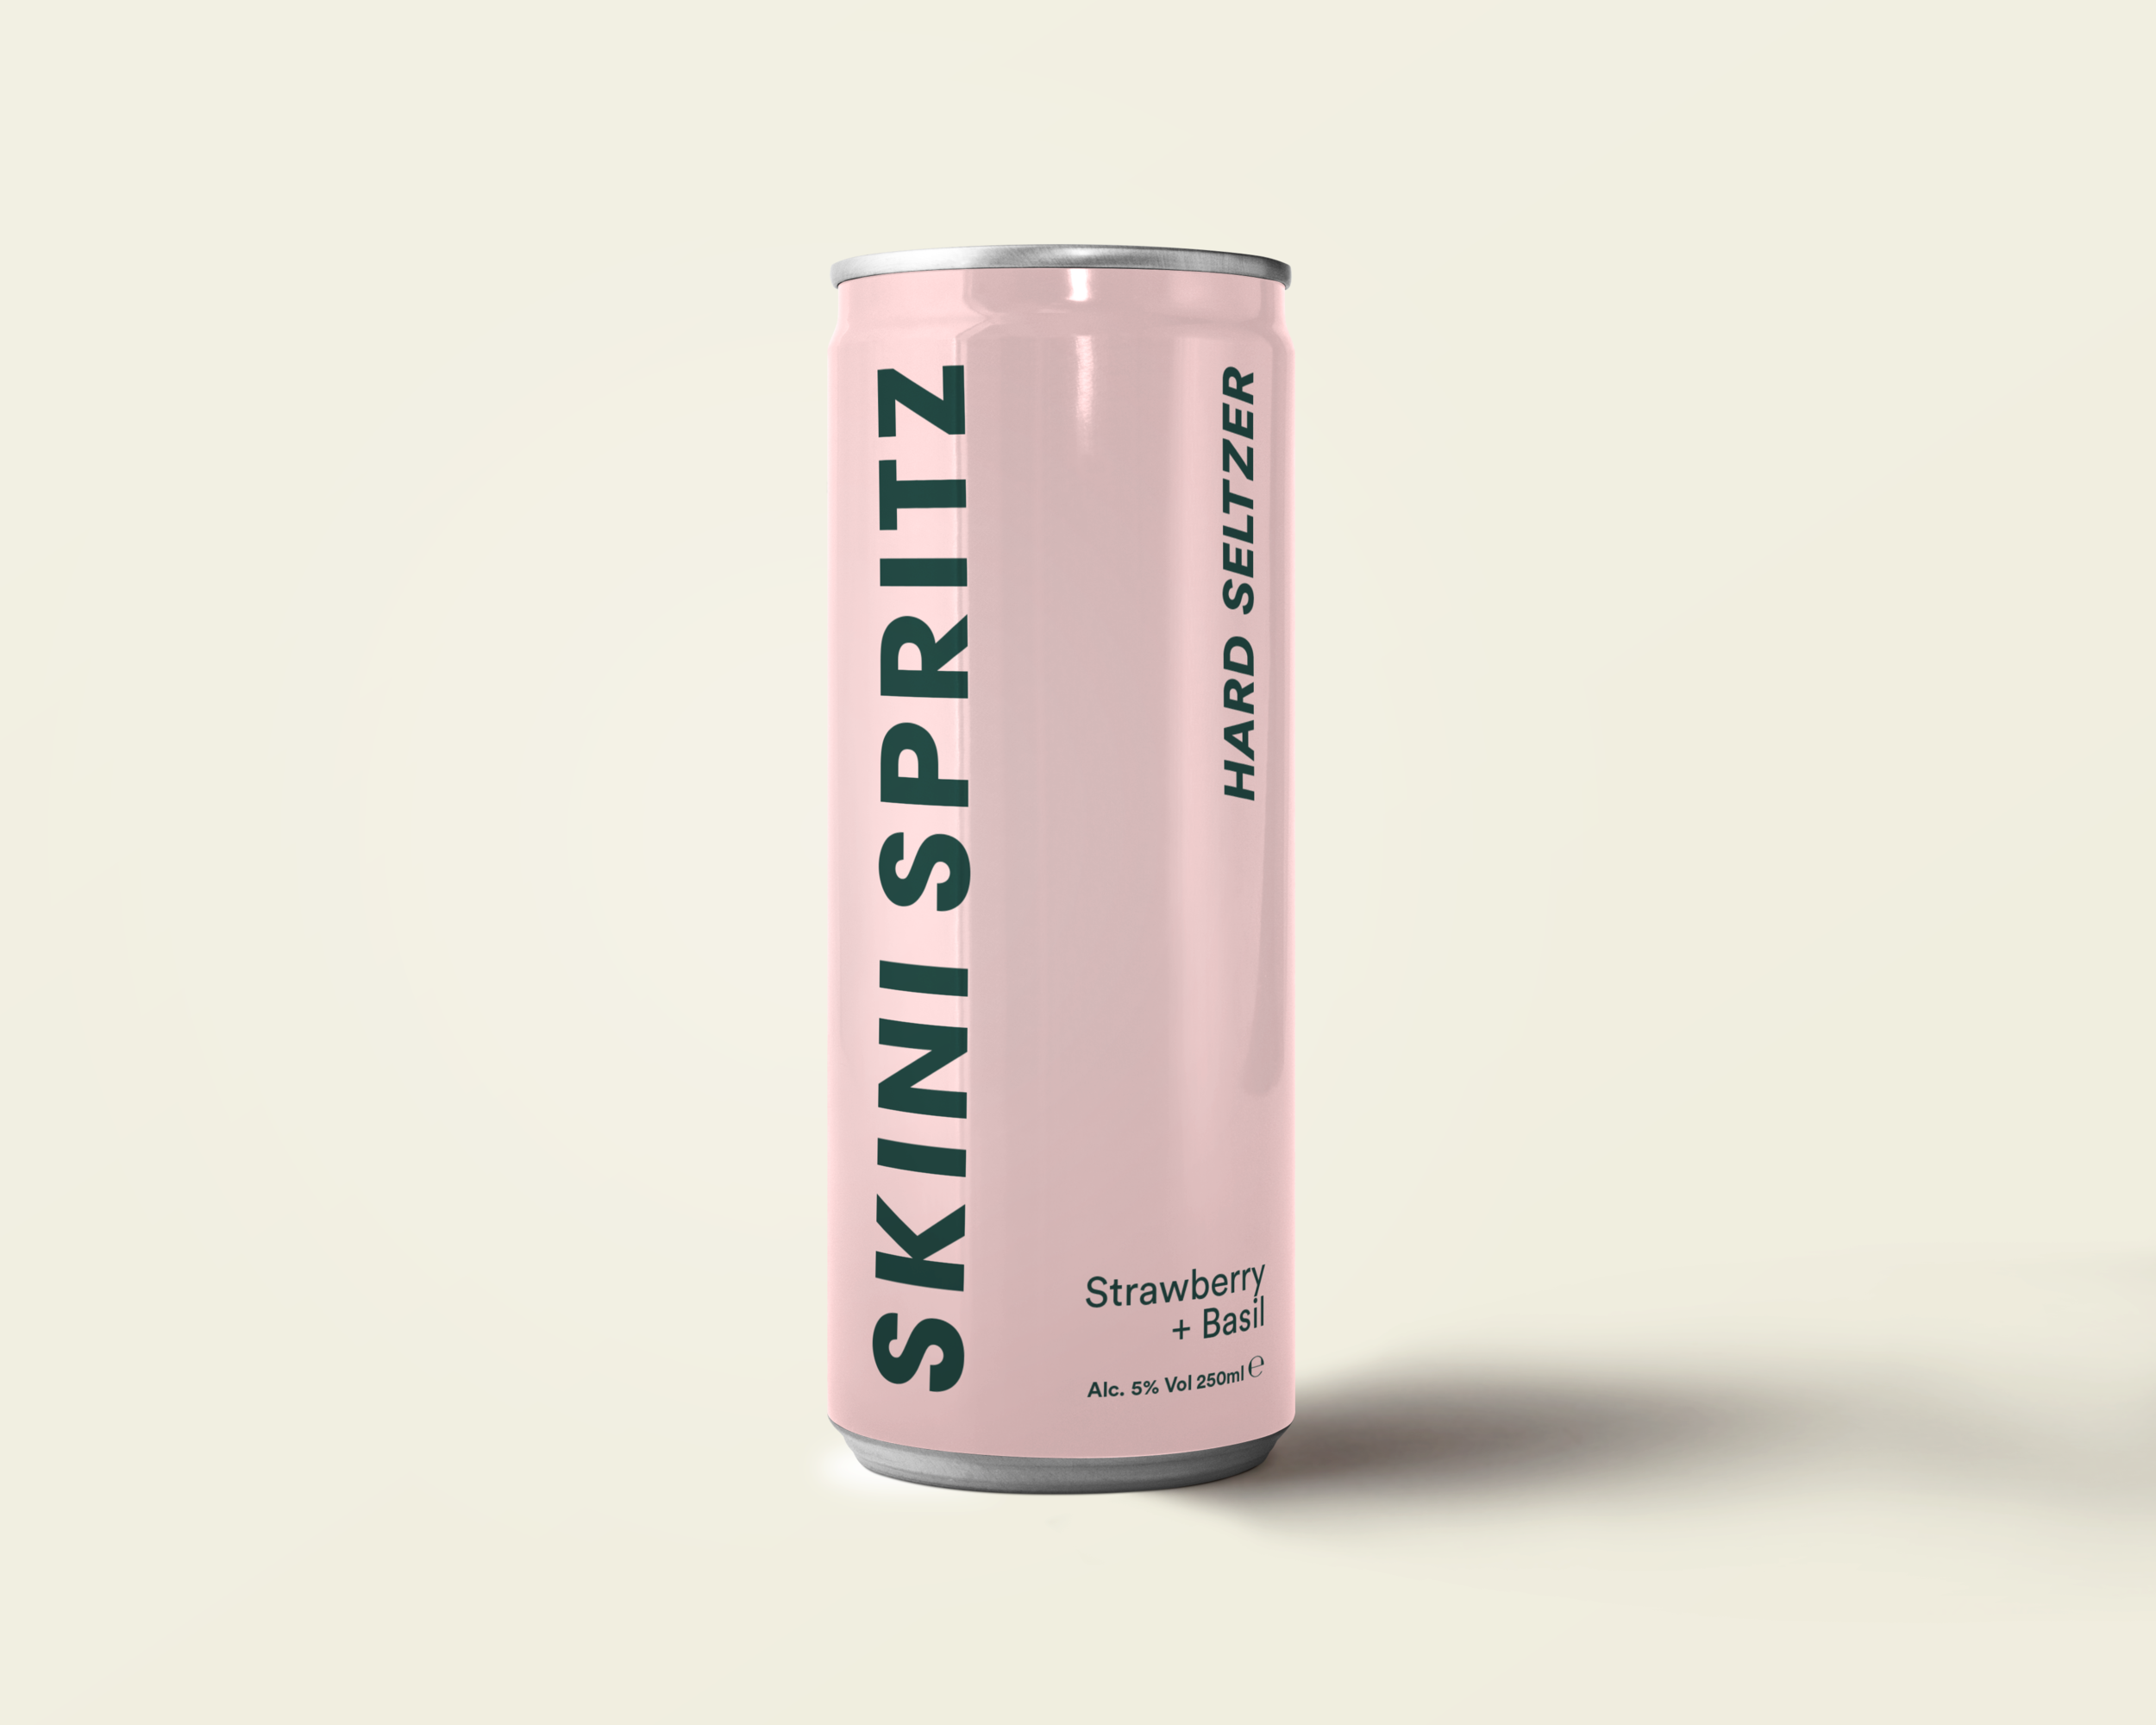 Packaging designer London. A baby pink can of hard seltzer brand Skini Spritz